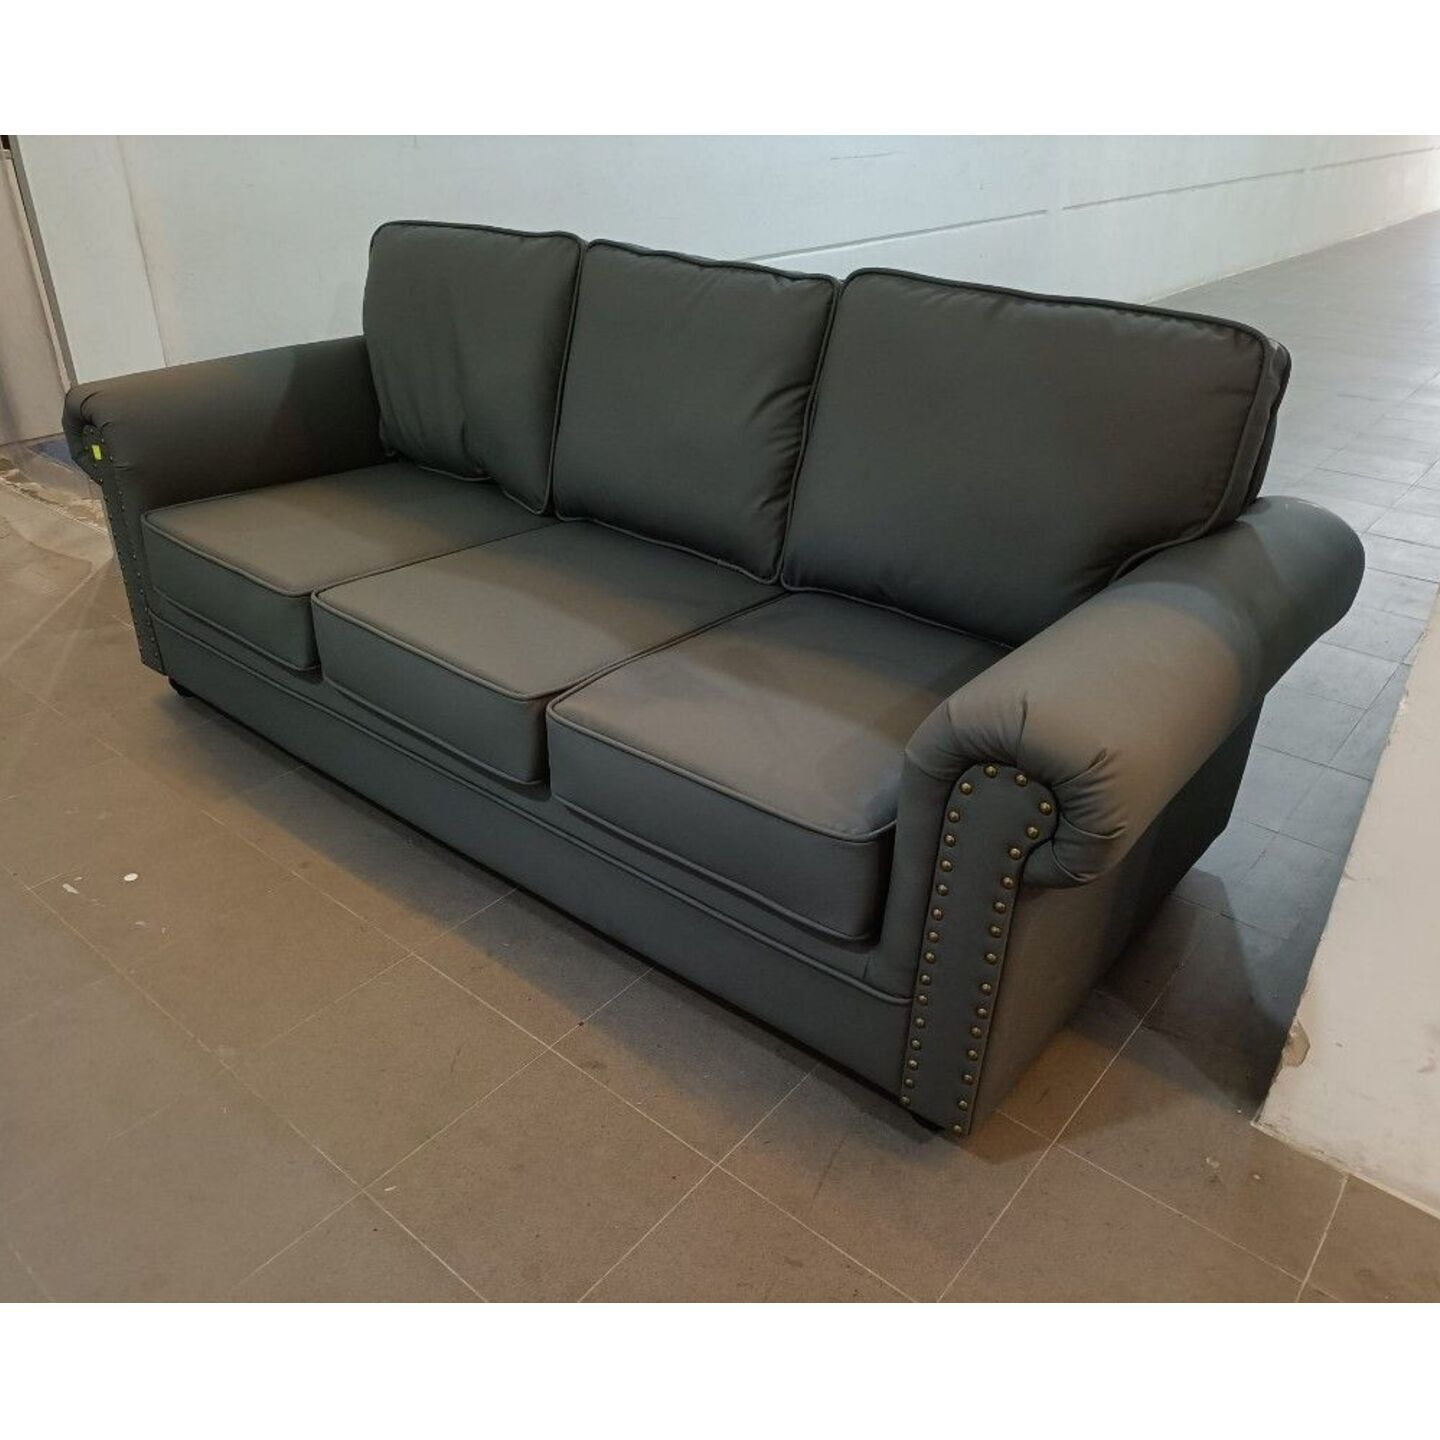 PET FRIENDLY VALENTORA 3 Seater Chesterfield Sofa in STORM GREY TECH LEATHAIRE